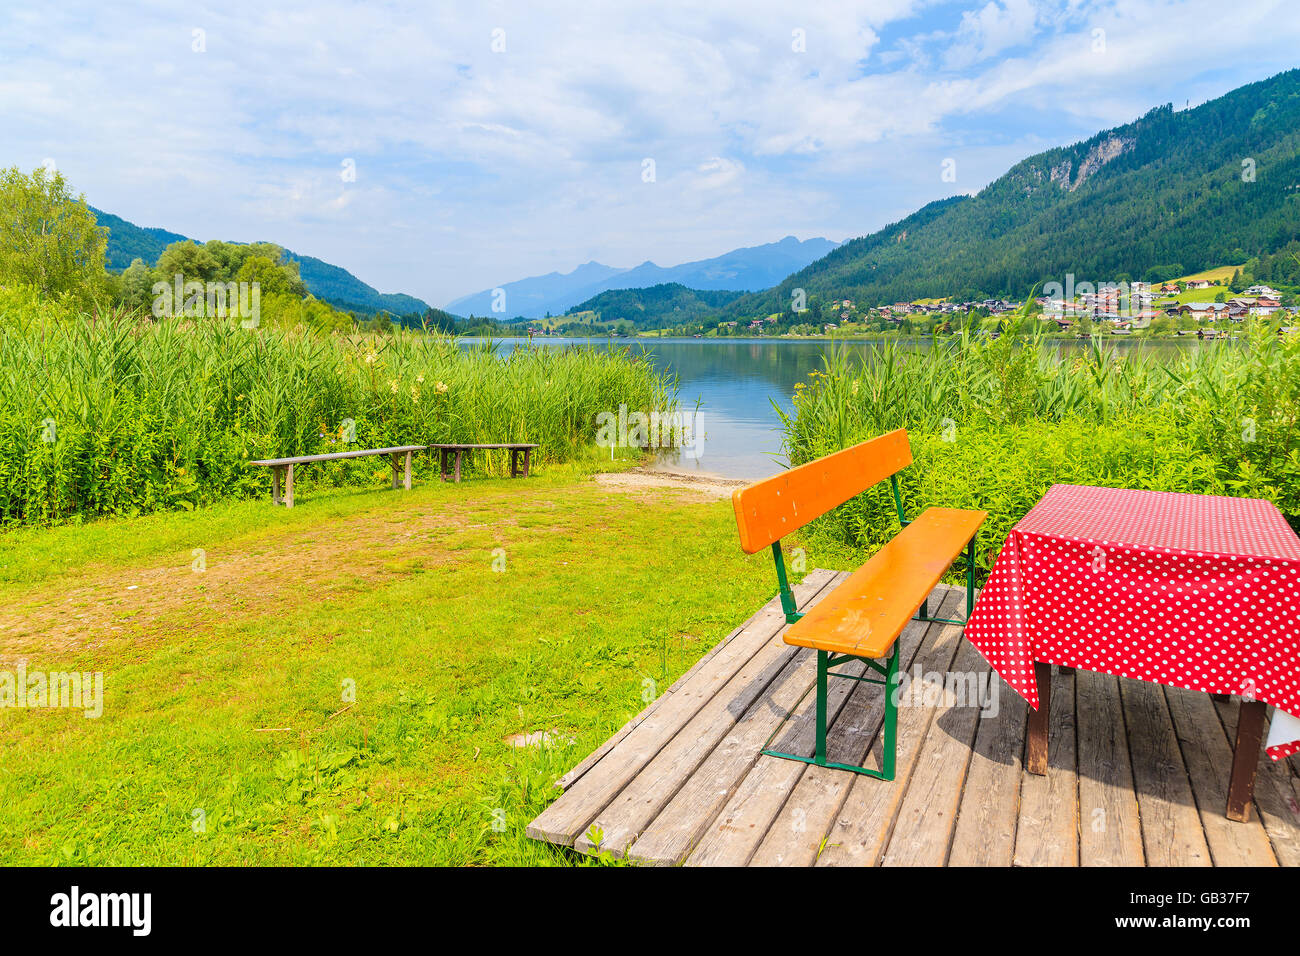 Bench with table on beach at Weissensee lake in summer landscape of Alps Mountains, Austria Stock Photo